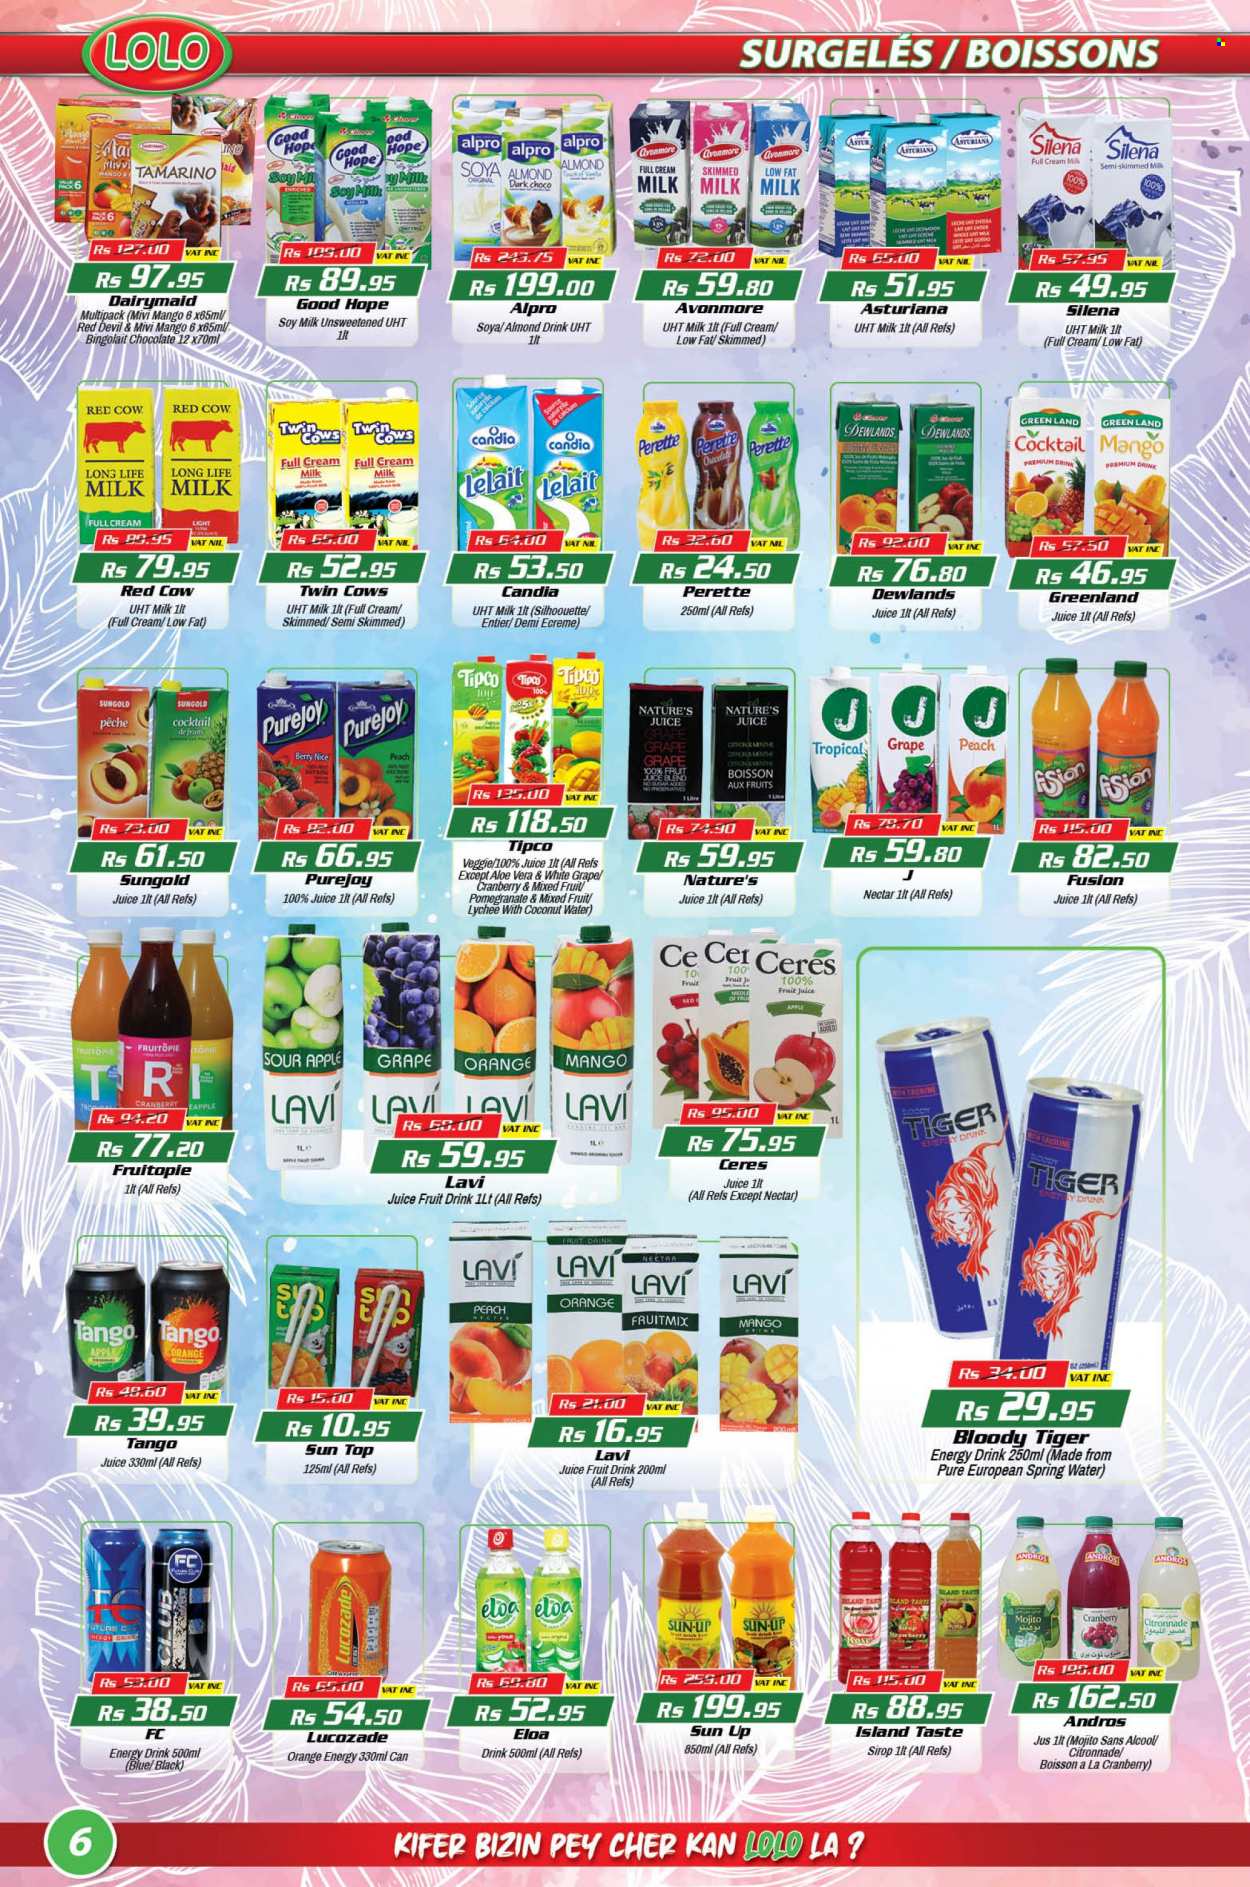 thumbnail - LOLO Hyper Catalogue - 26.09.2022 - 17.10.2022 - Sales products - lychee, pears, oranges, pomegranate, soy milk, long life milk, chocolate, juice, fruit juice, energy drink, fruit drink, Cerés, Lucozade, spring water, wine, rosé wine, sherry, rose, Alpro. Page 6.